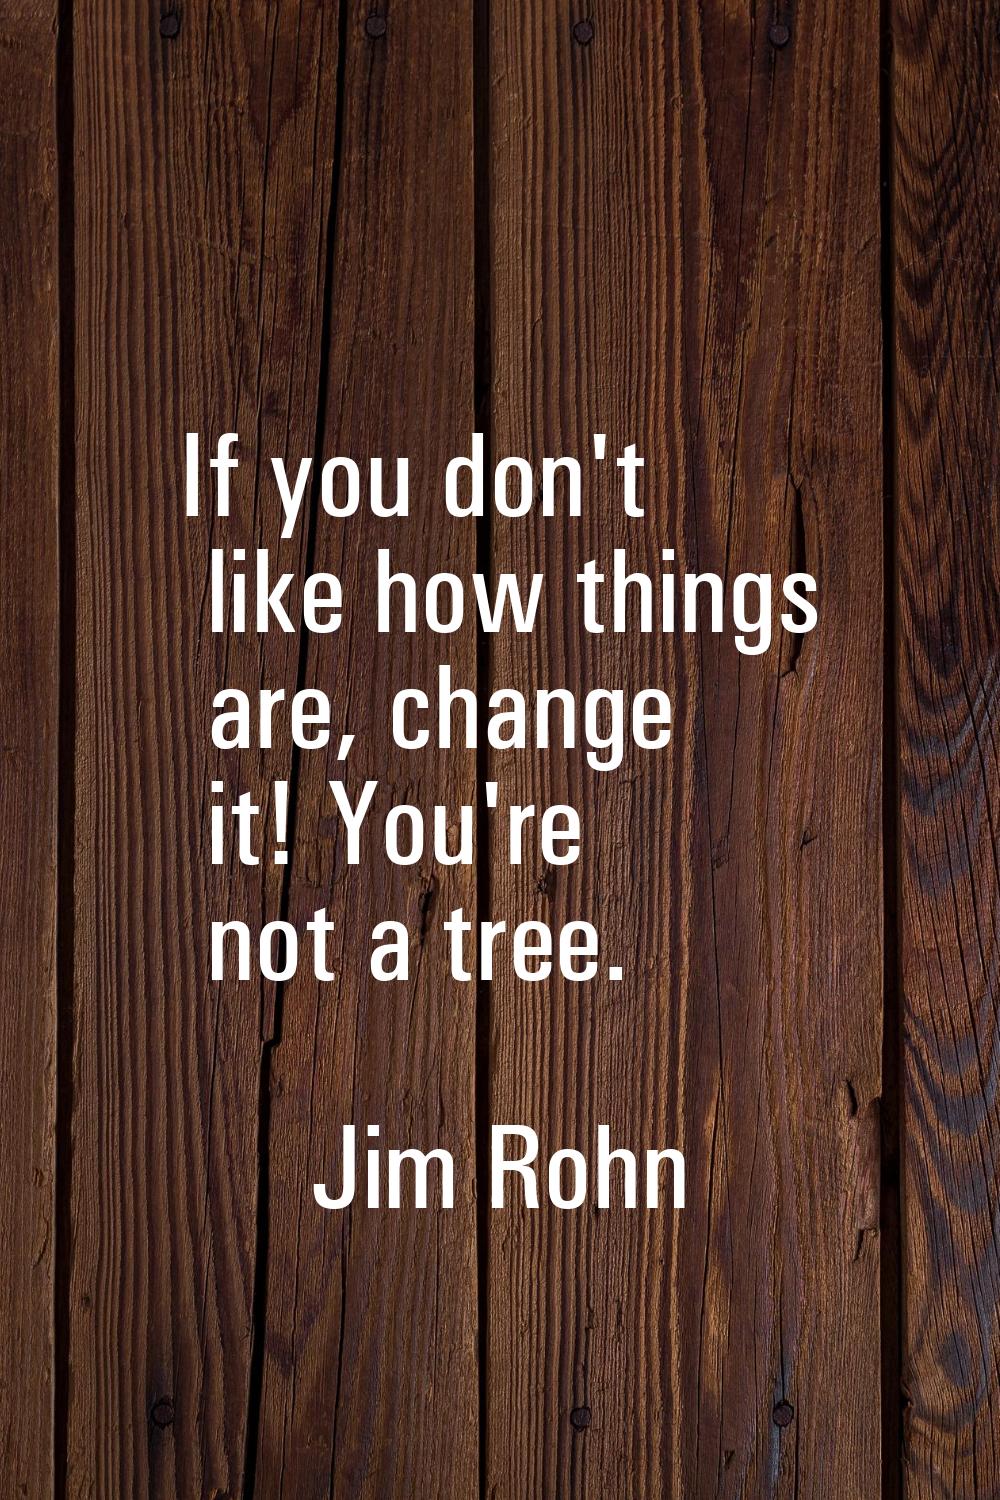 If you don't like how things are, change it! You're not a tree.